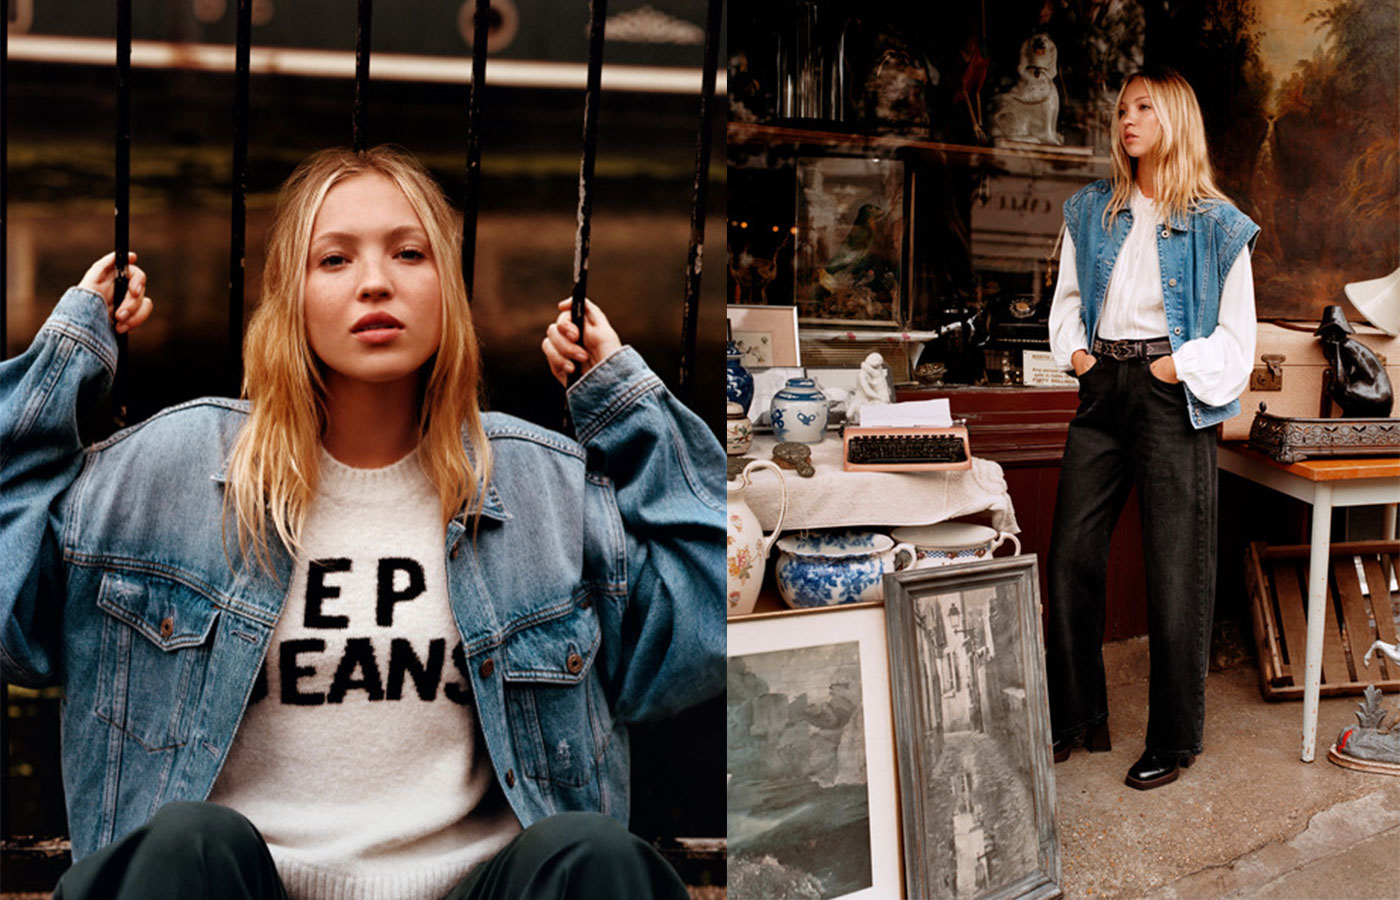 Lila Moss stars in latest Pepe Jeans campaign - The Glass Magazine